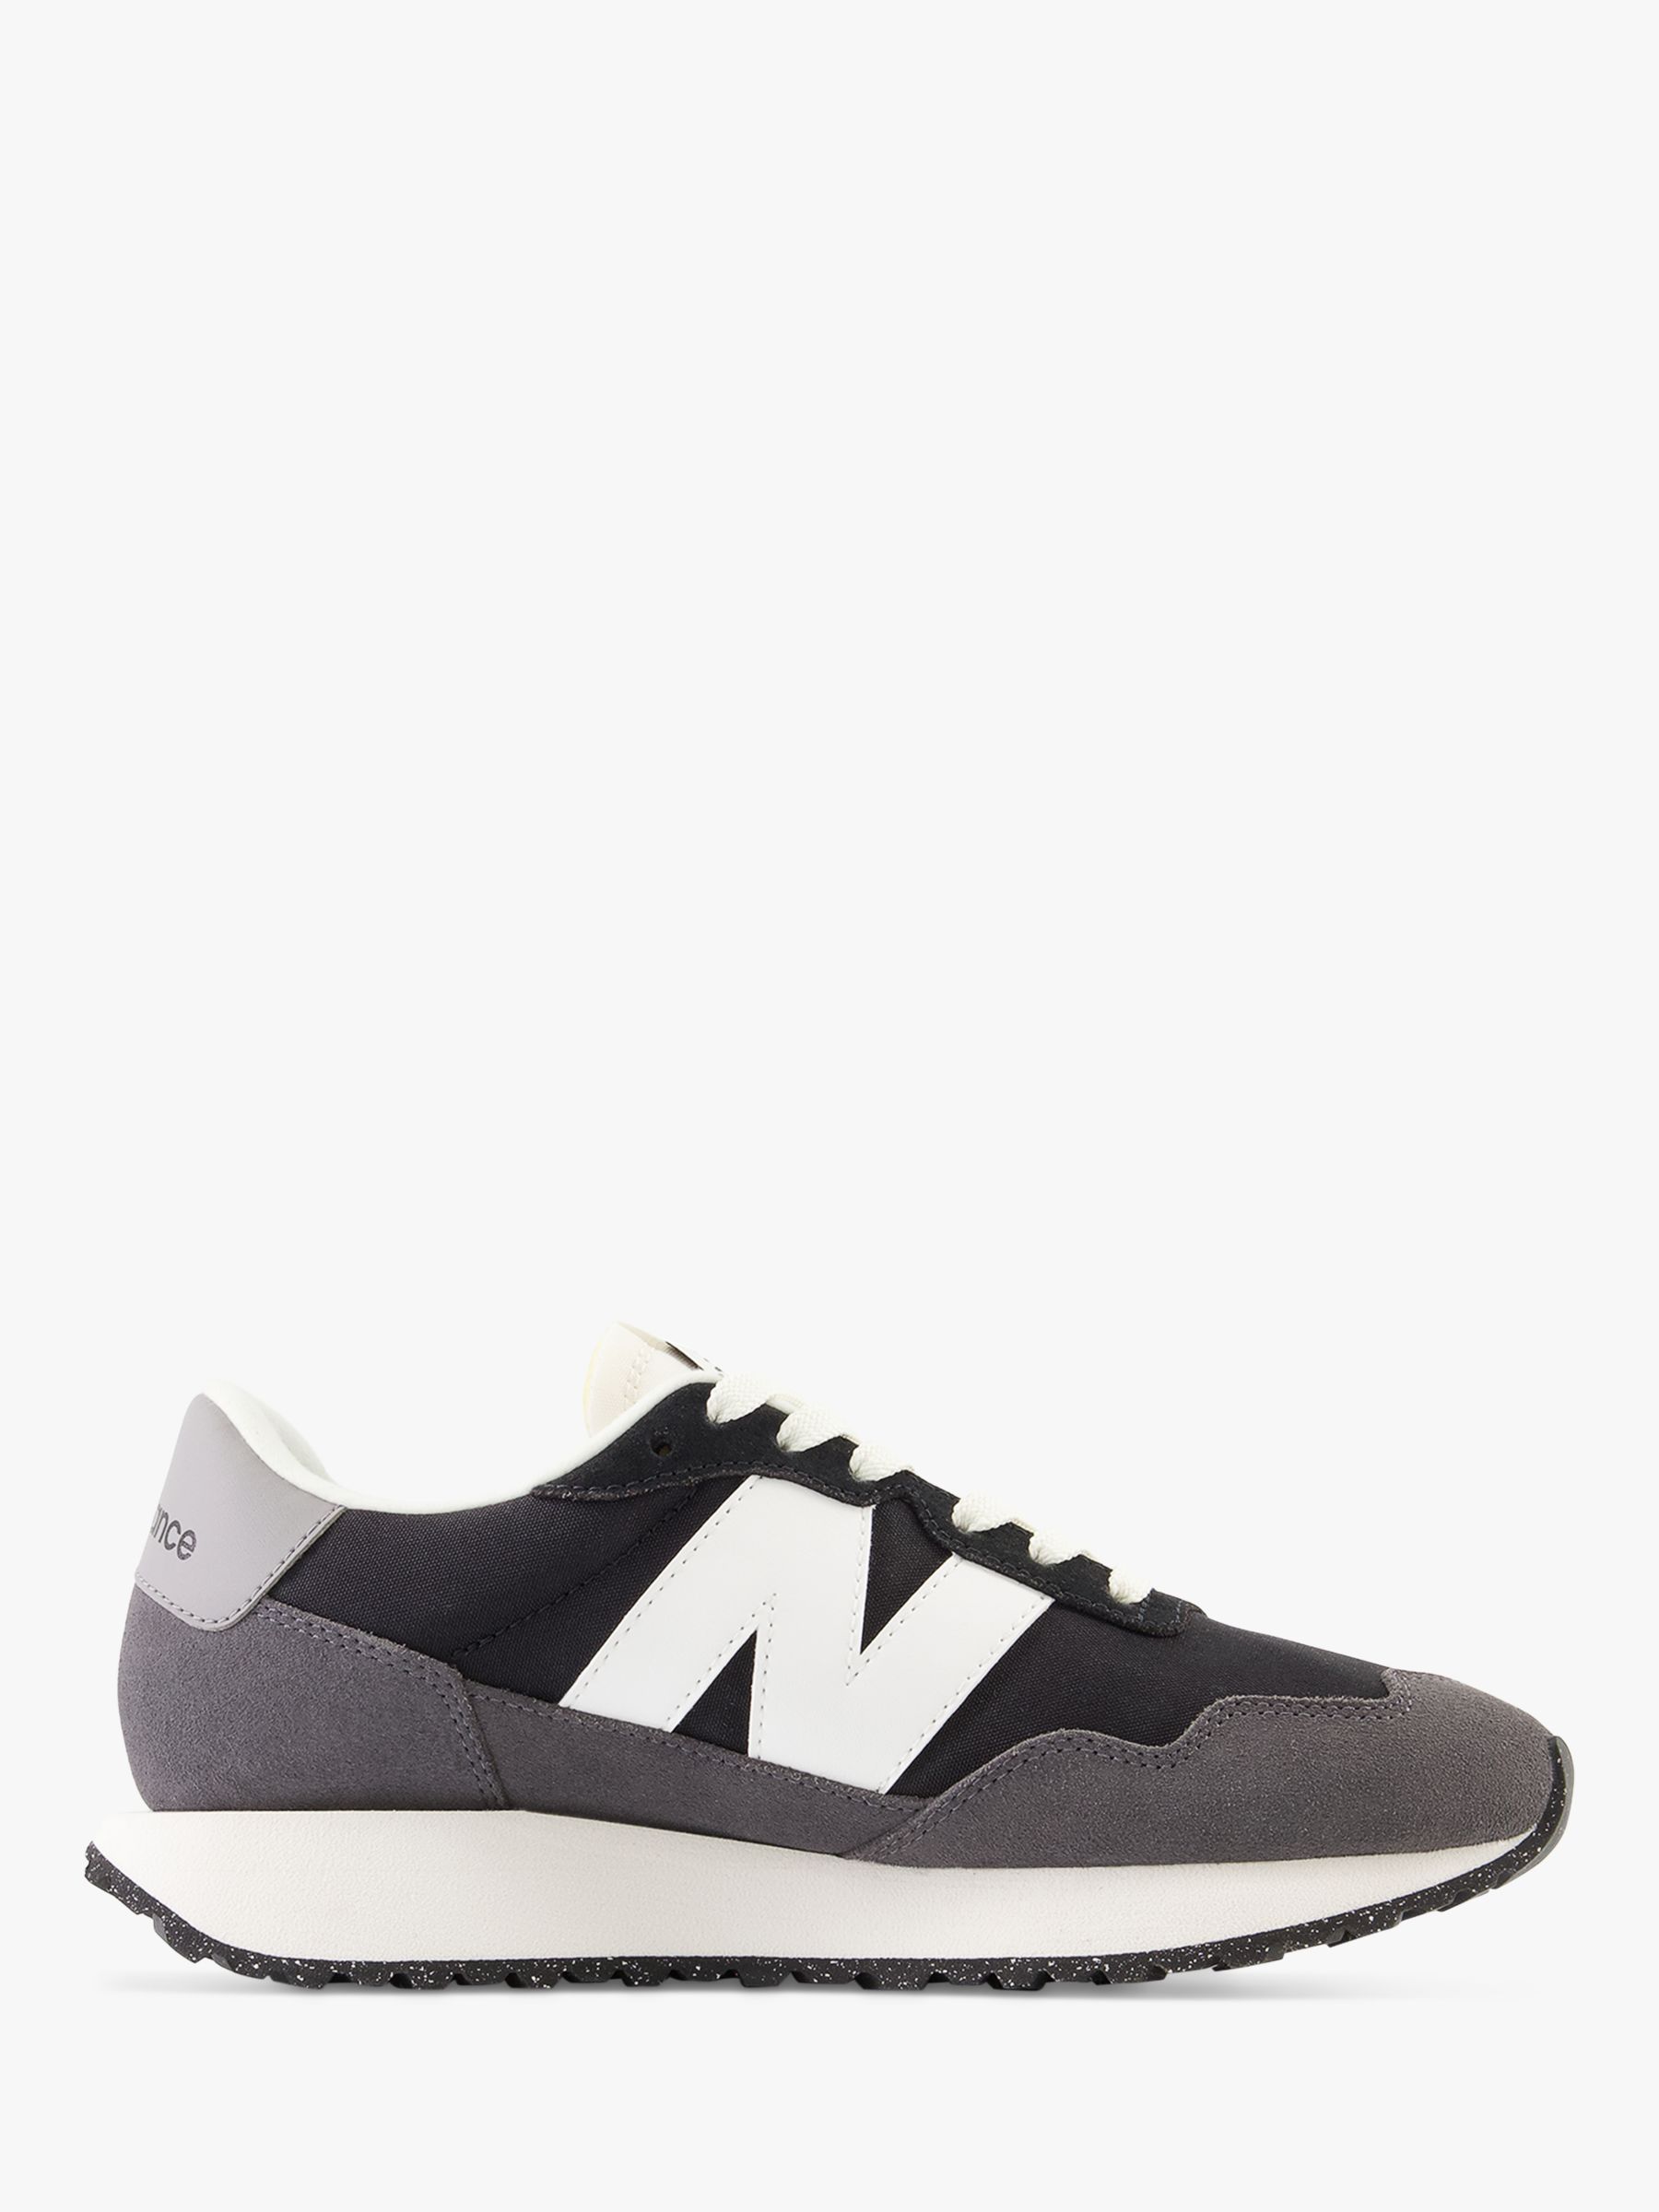 New Balance 237 Suede Mesh Trainers, Black